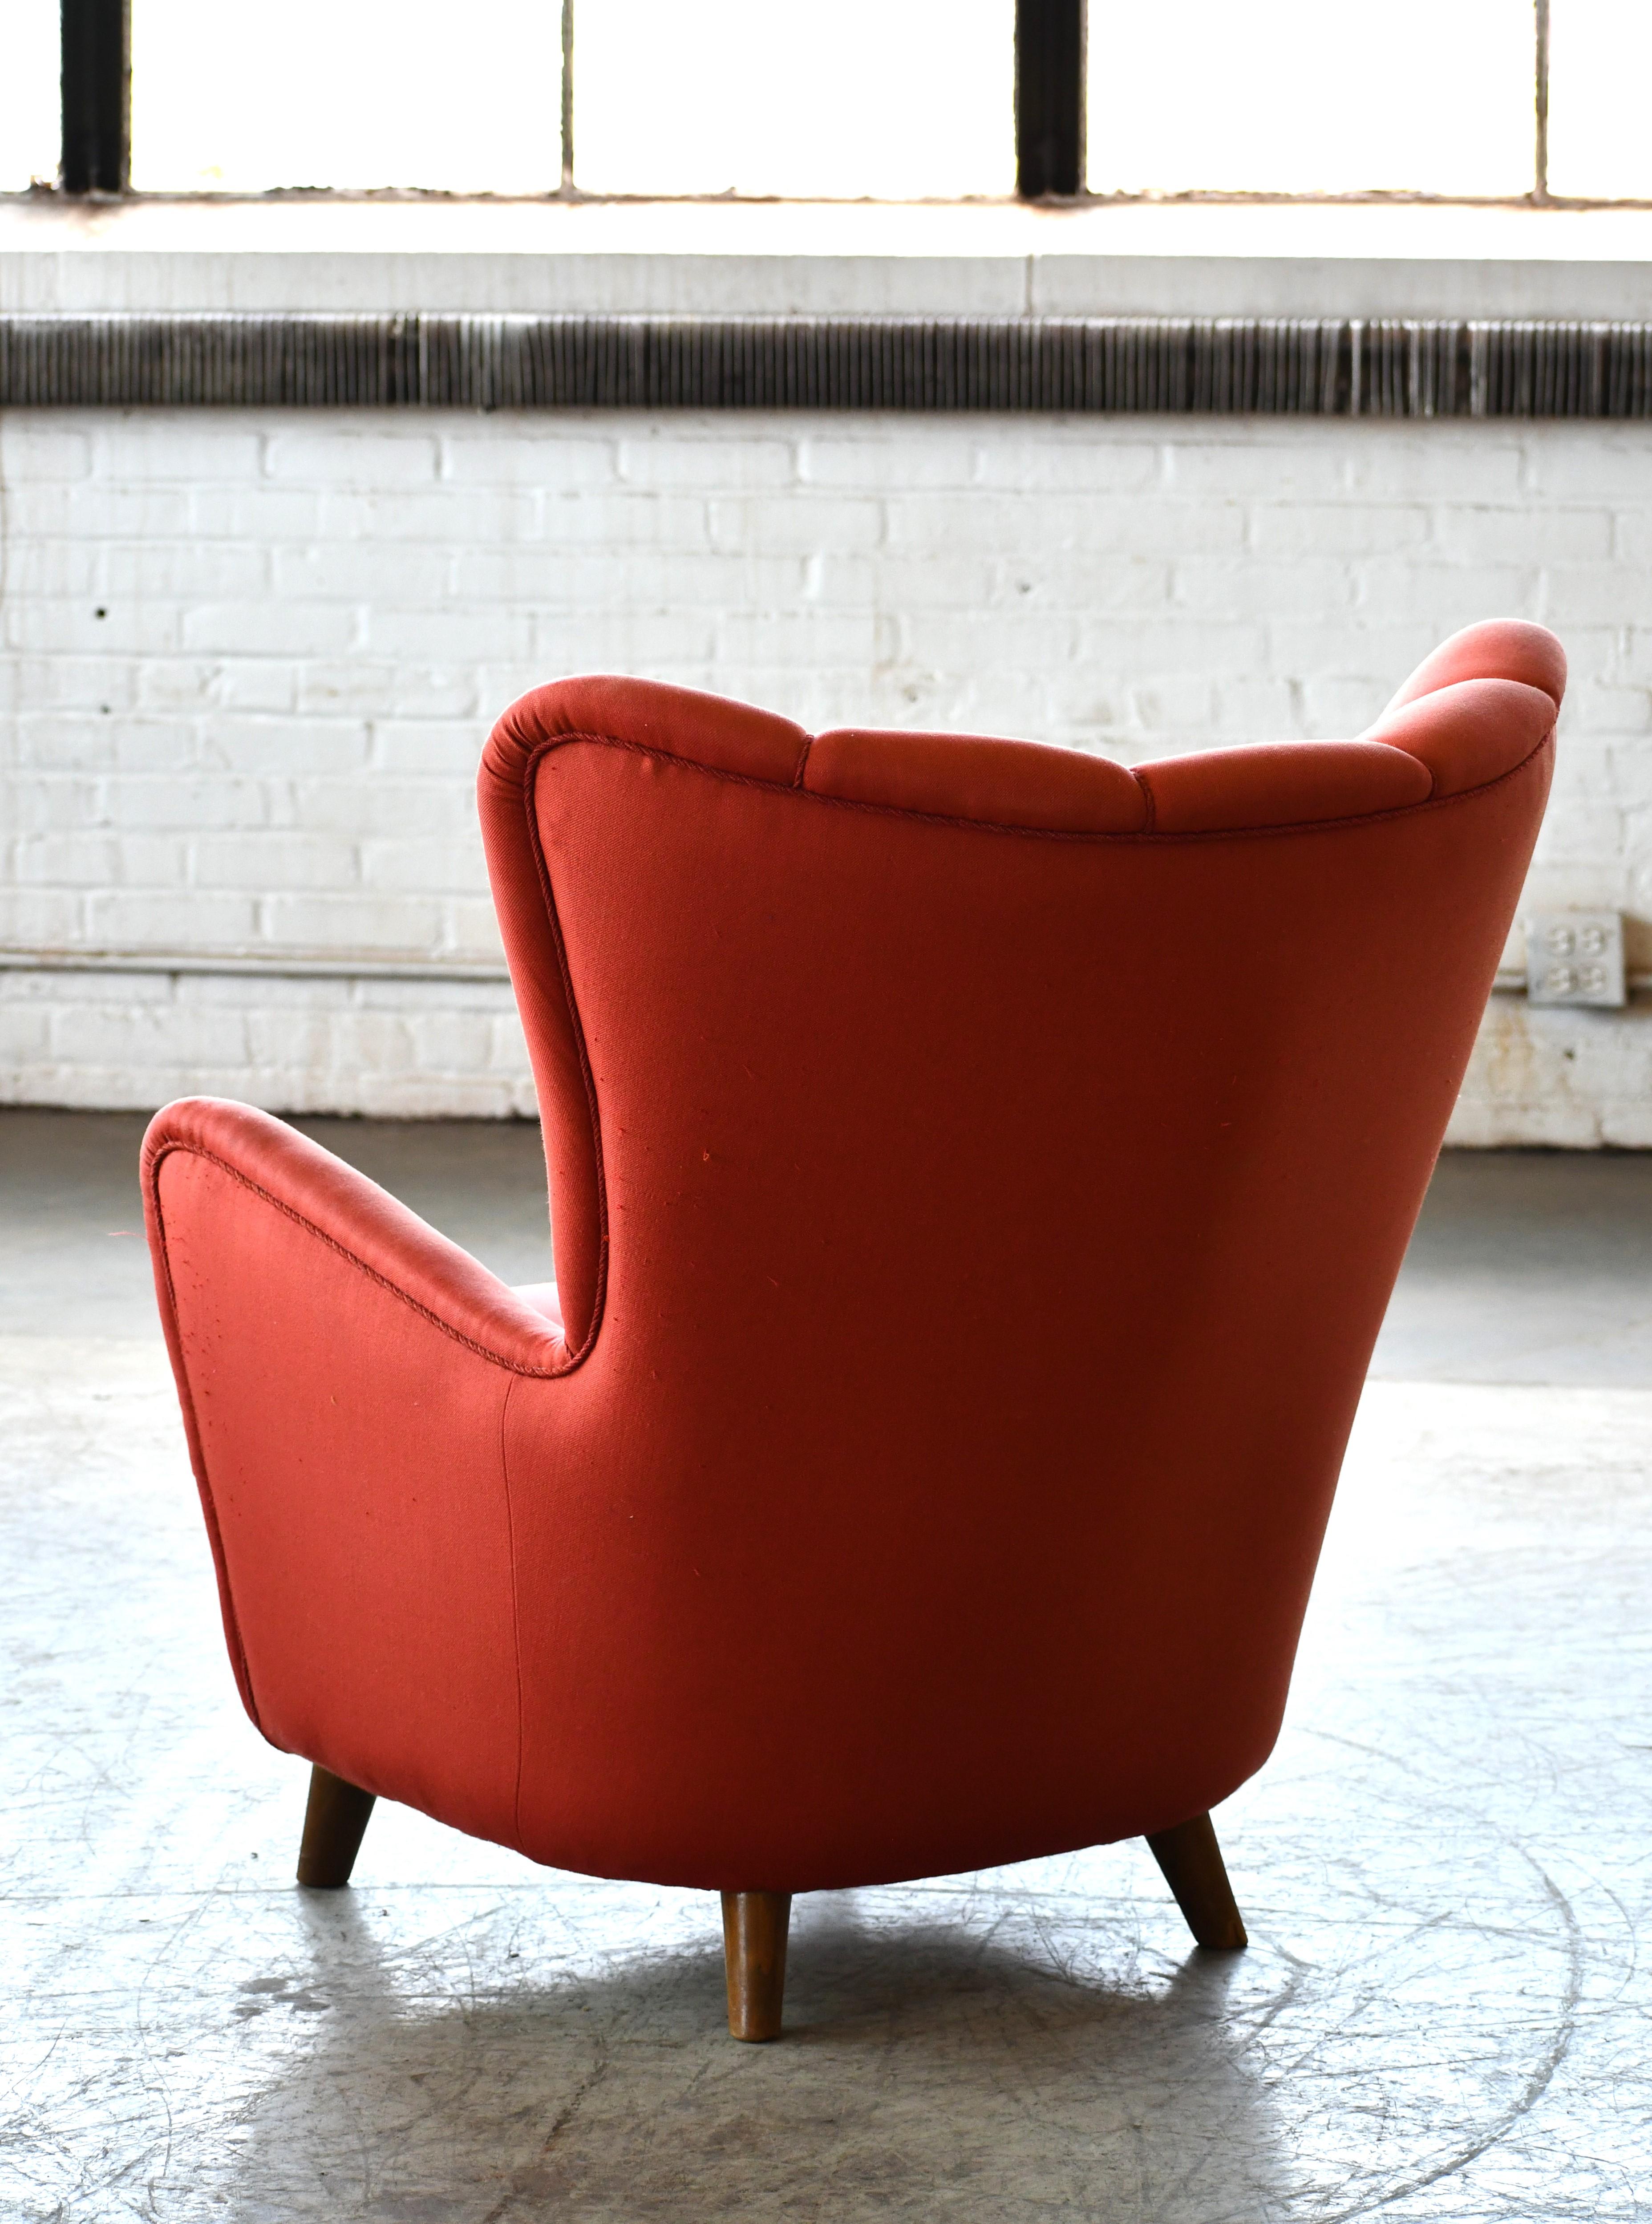 Exquisite Danish Lassen Style Mid-Century Lounge Chair in Red Wool, 1940's For Sale 3